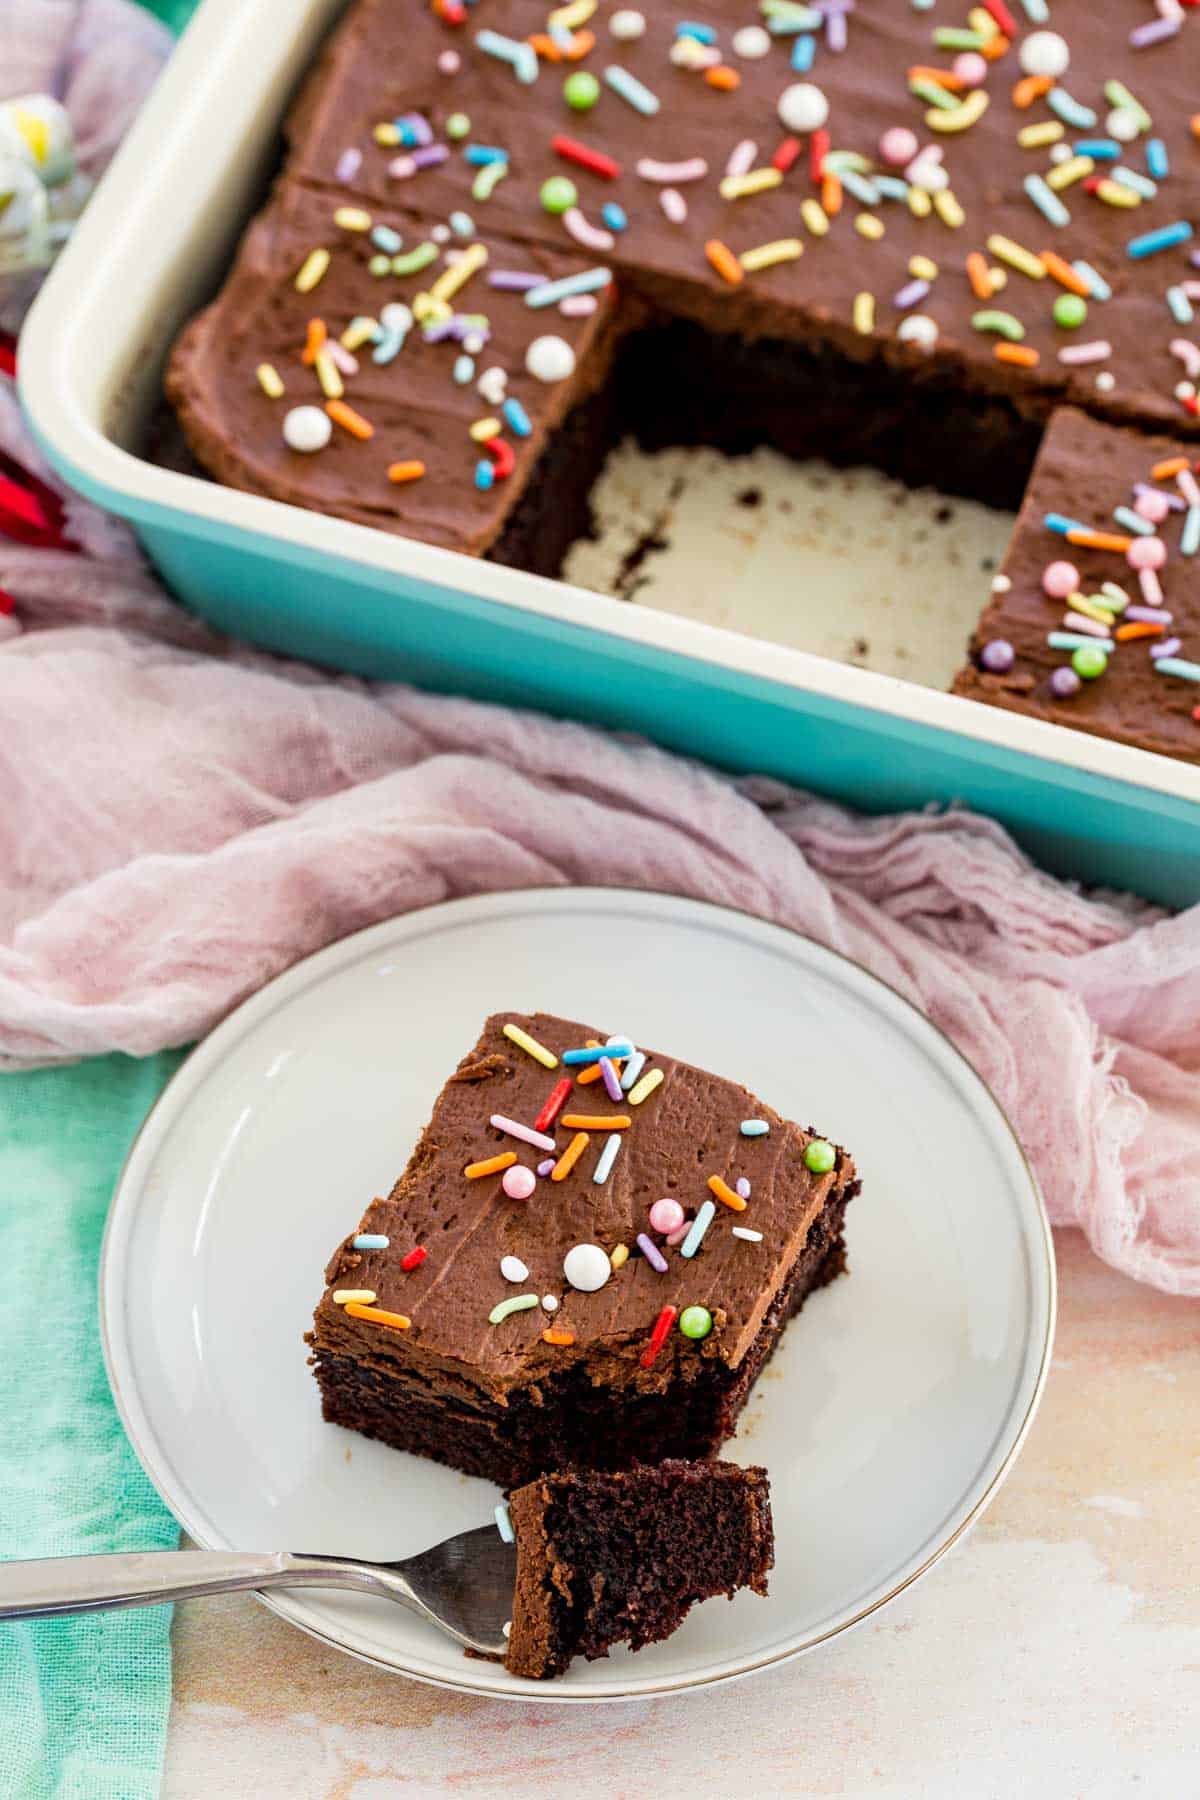 A square slice of chocolate cake with sprinkles on a plate, next to a baking dish filled with cake.